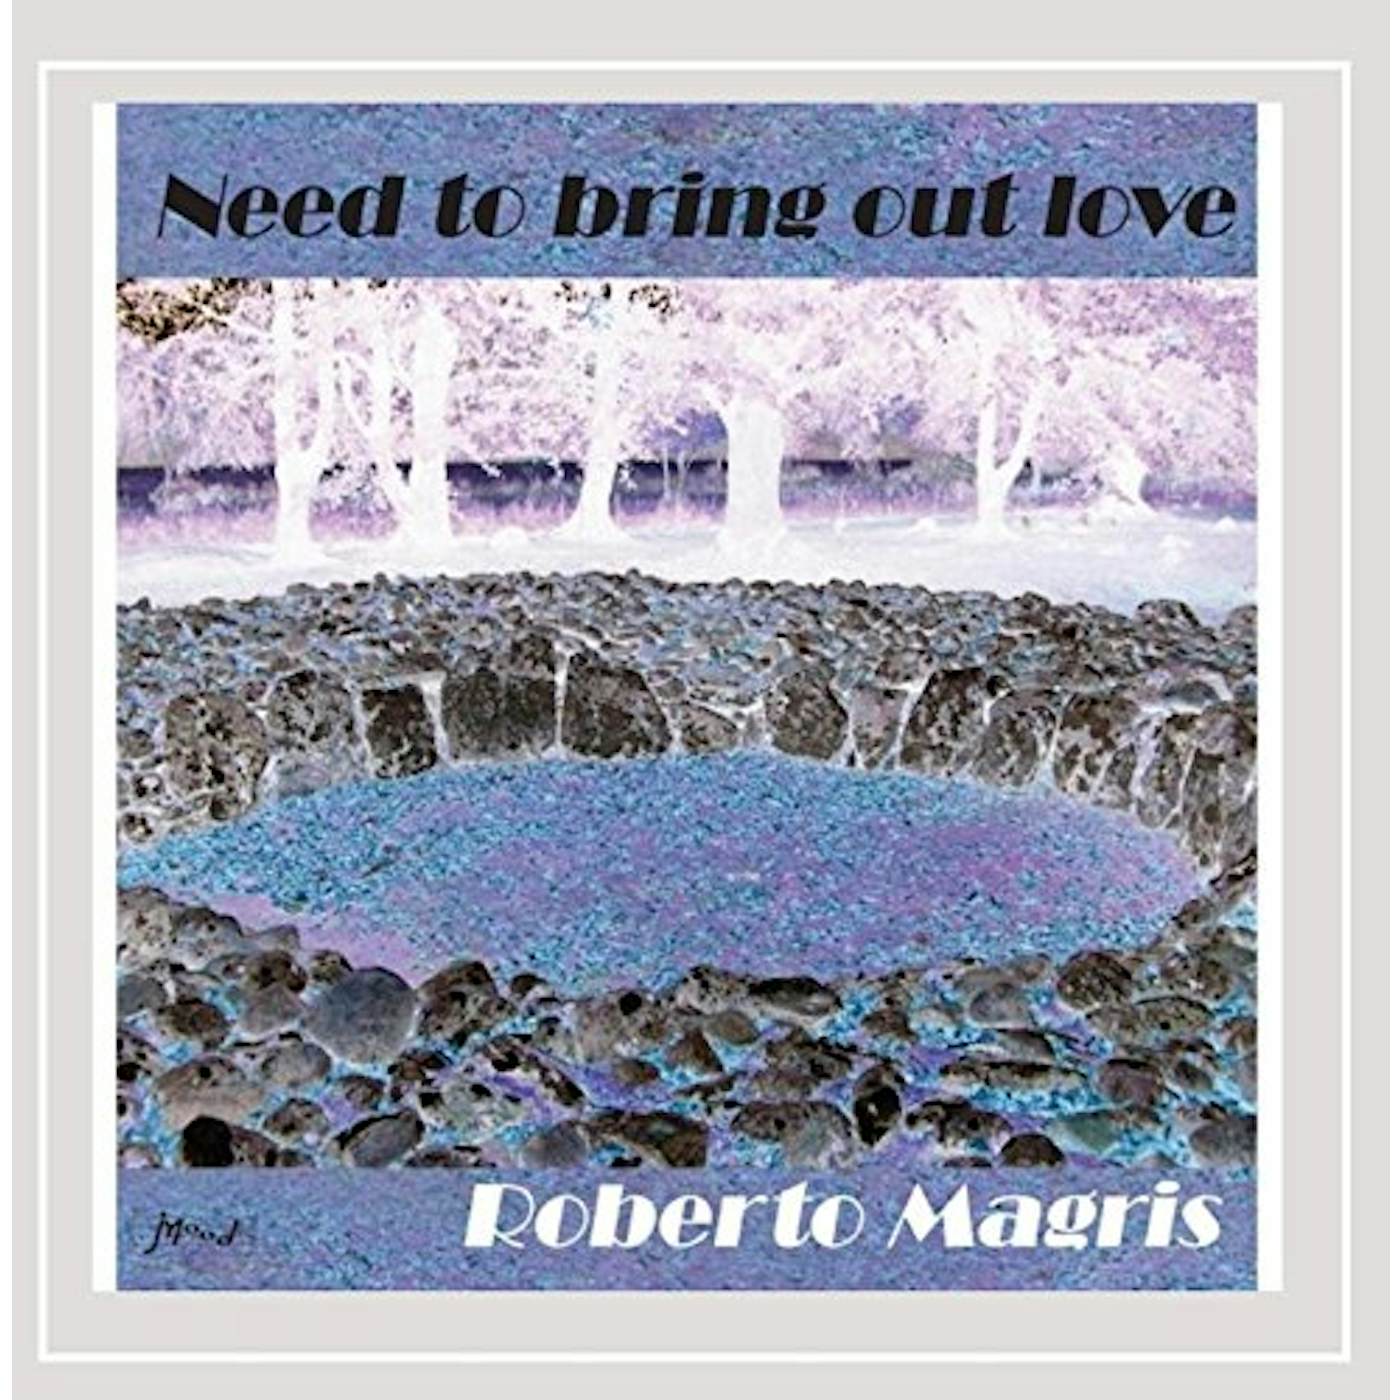 Roberto Magris NEED TO BRING OUT LOVE CD